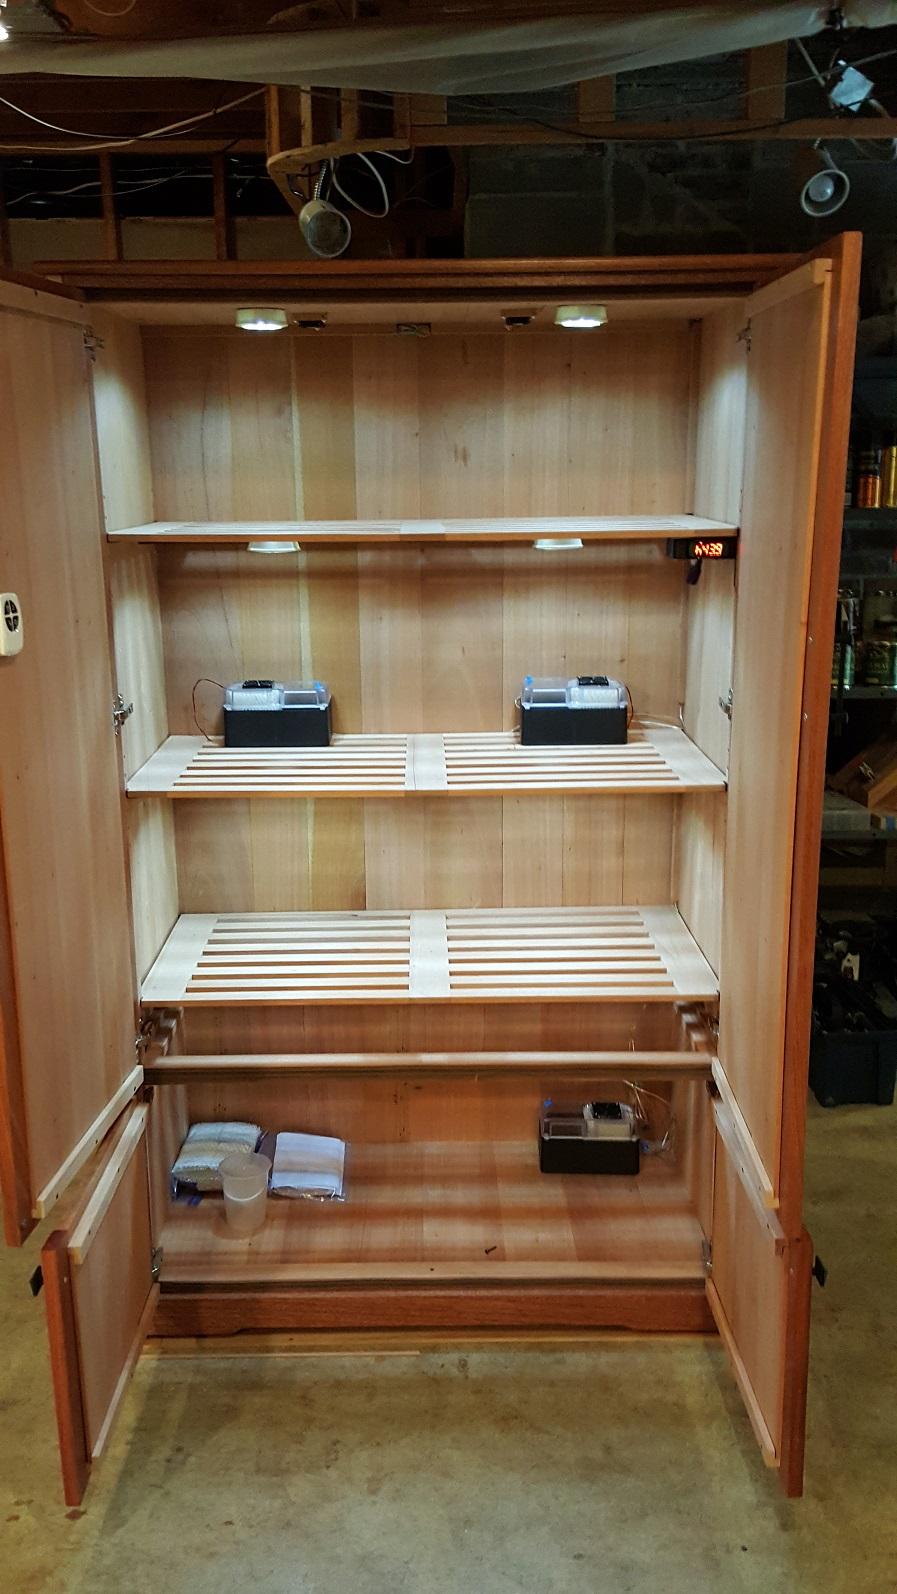 Building A Cabinet Humidor Next Winter